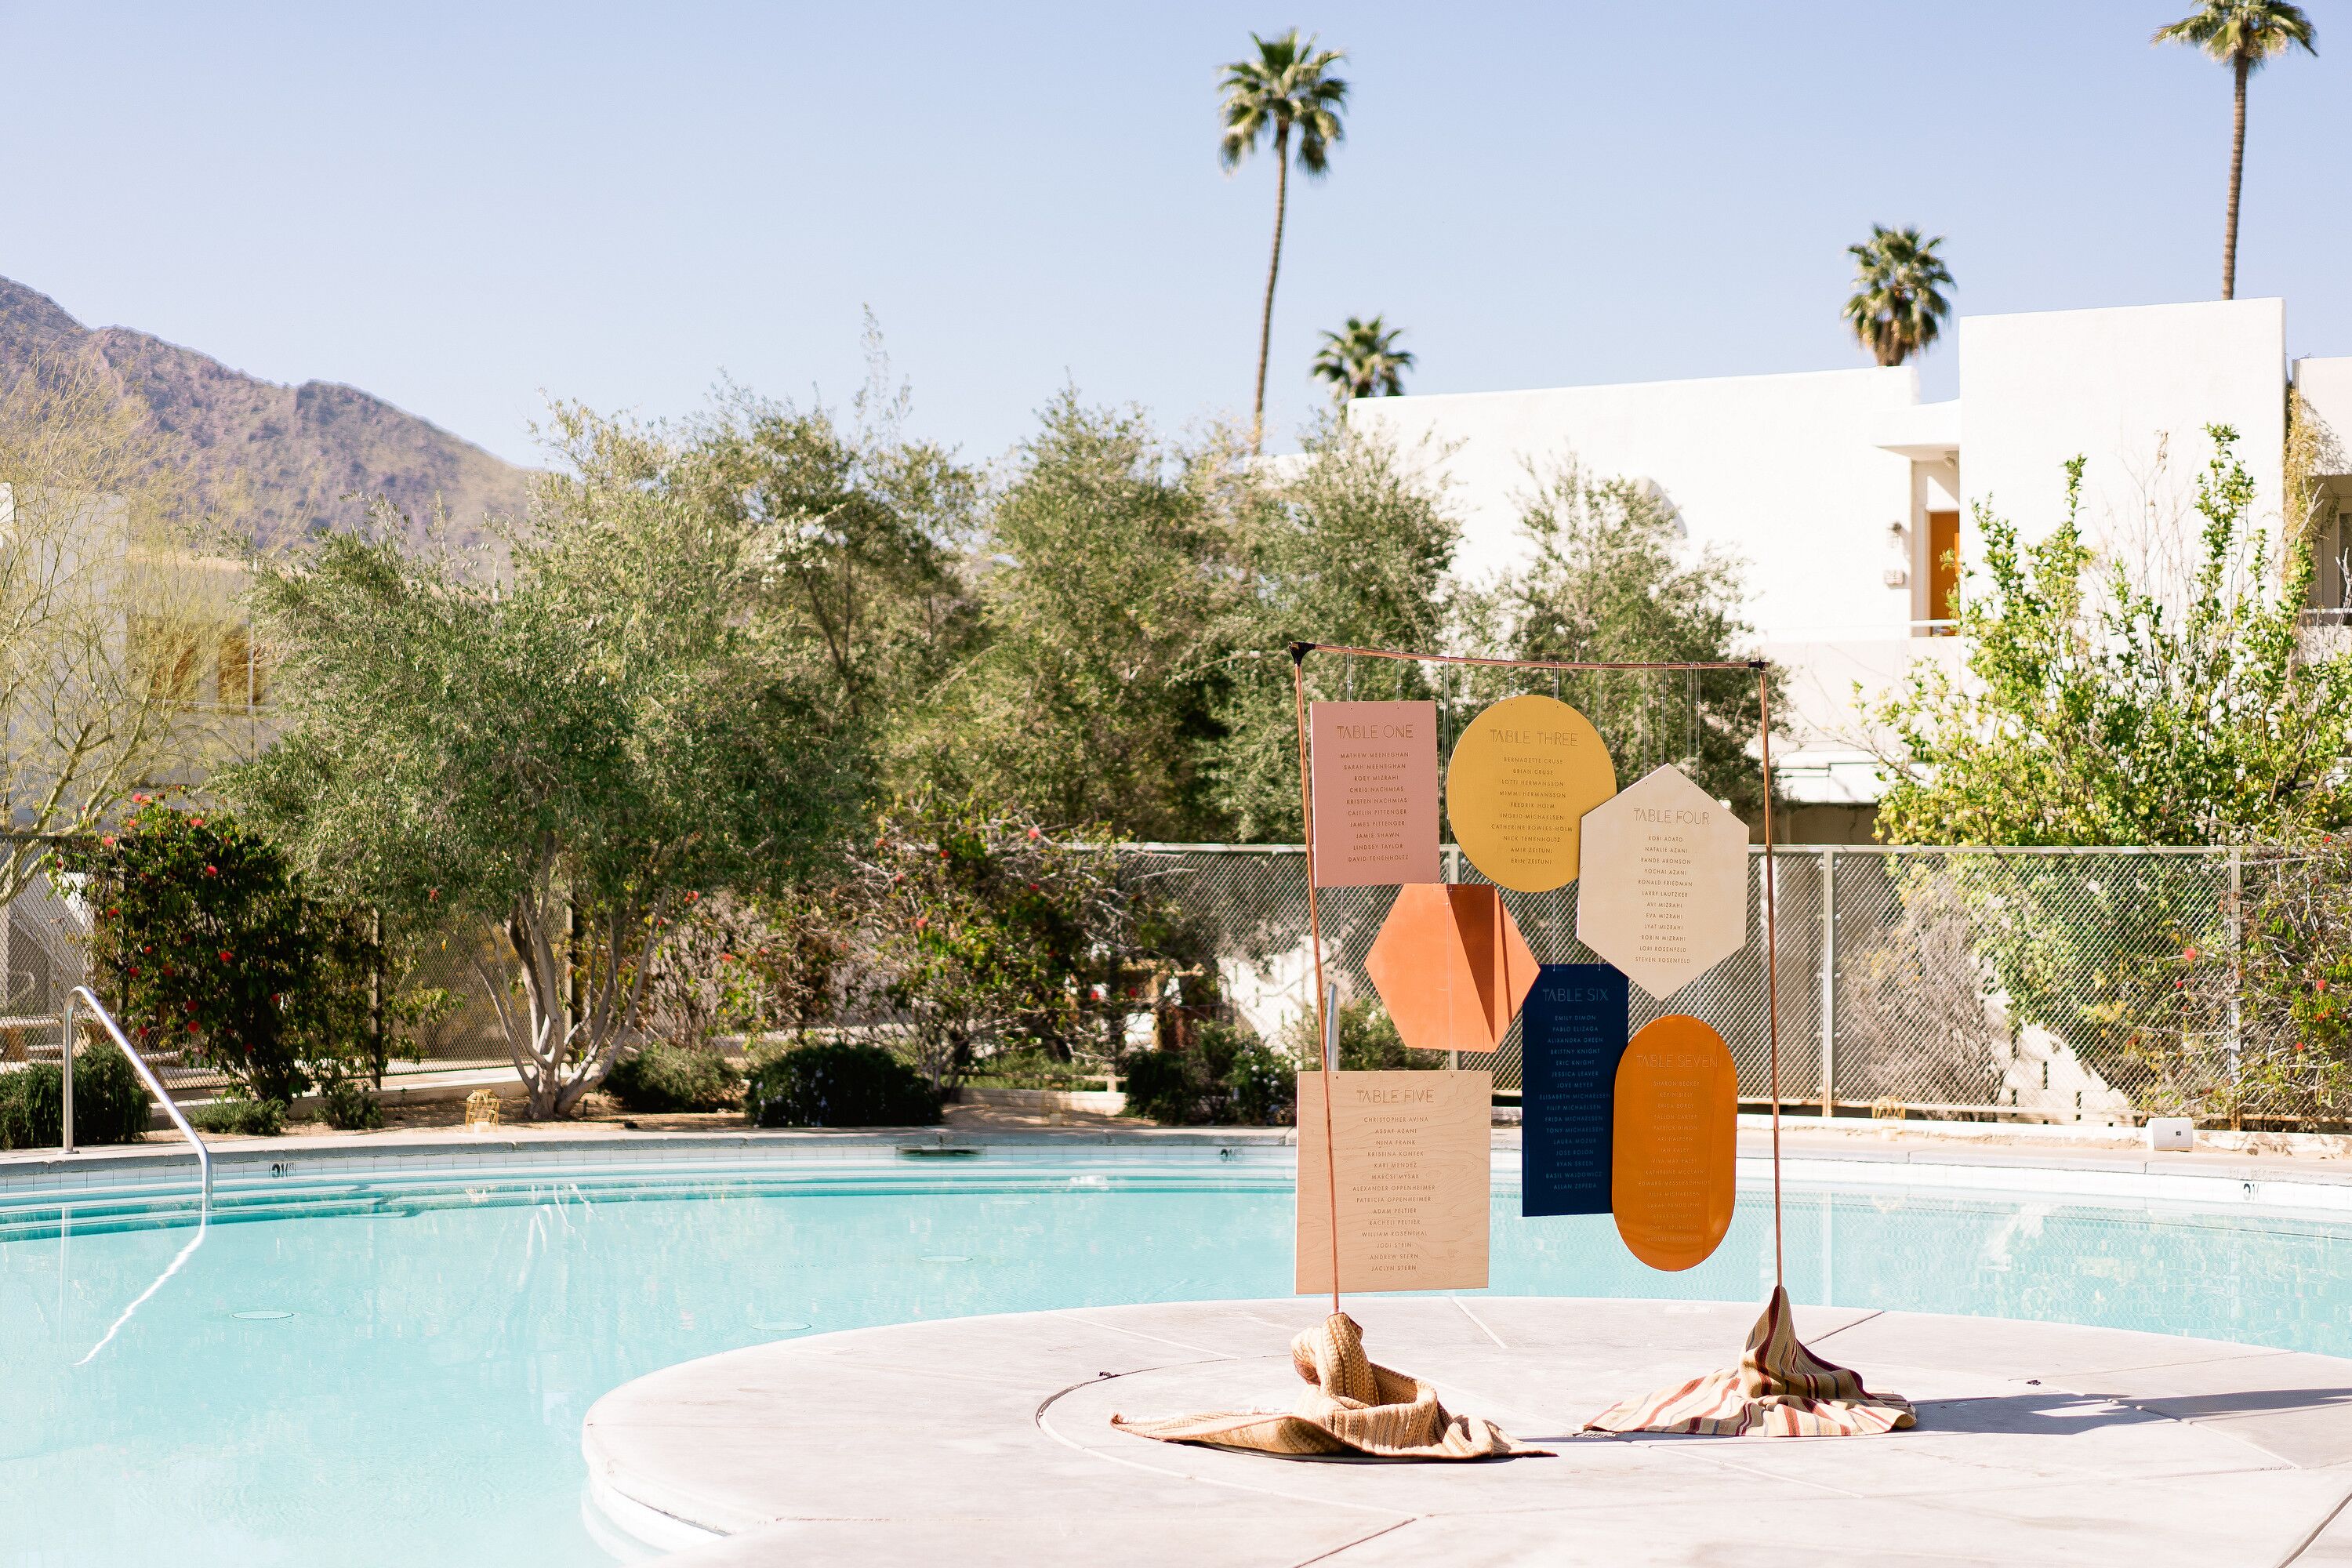 Funky Seating Chart Beside Pool At The Ace Hotel And Swim Club In Palm Springs